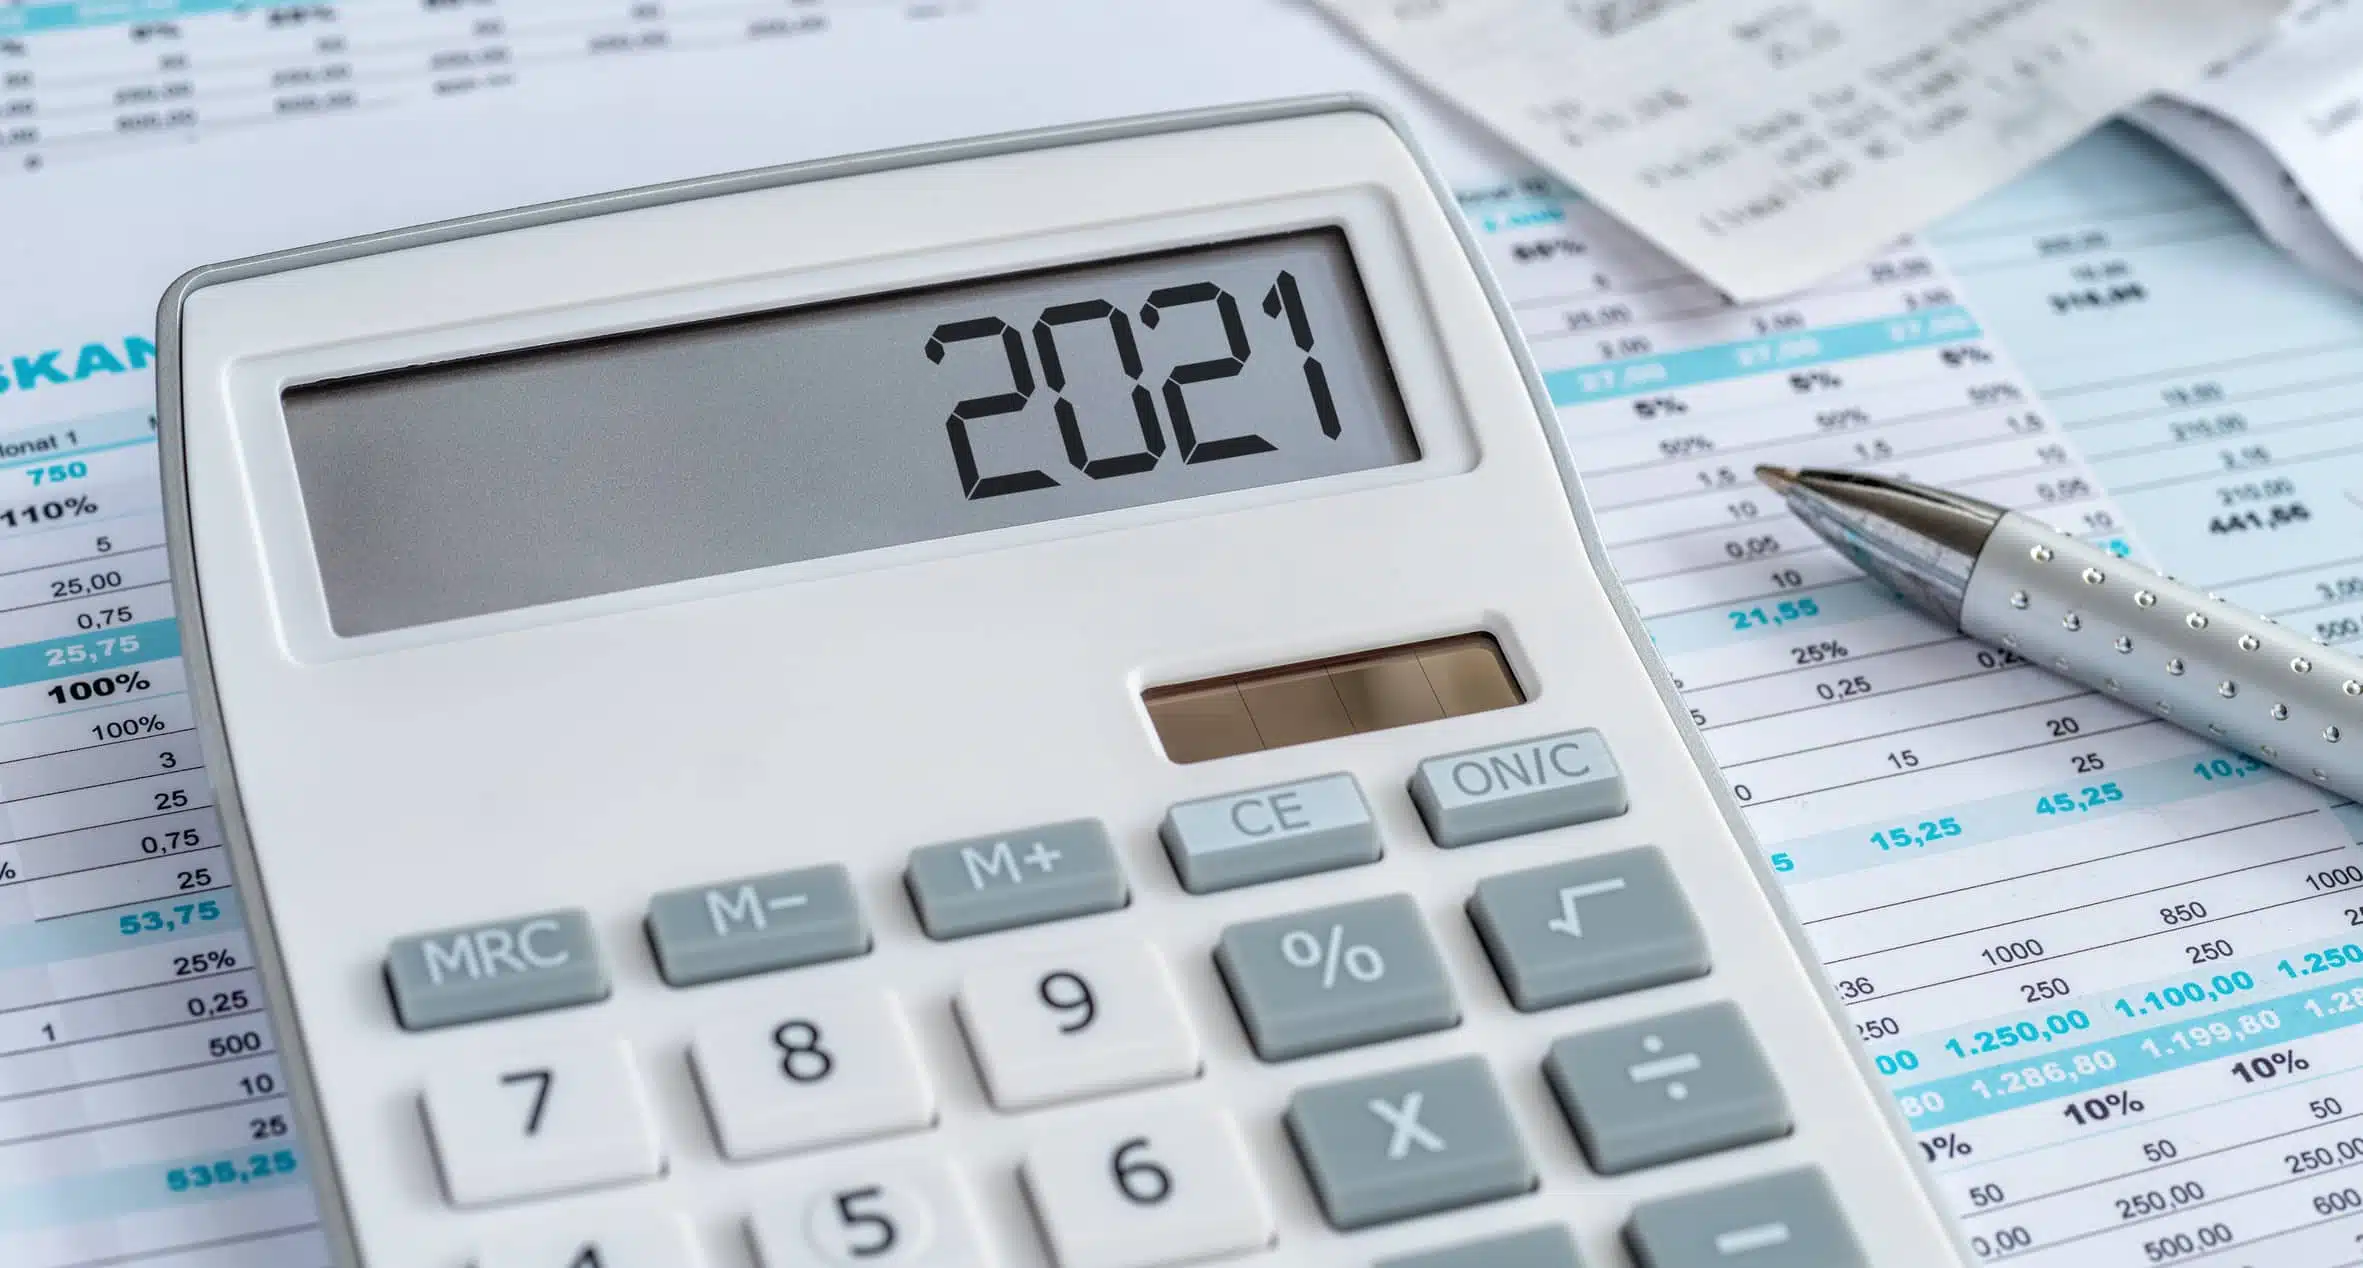 A calculator with the 2021 on the display while calculating non-slip coating prices